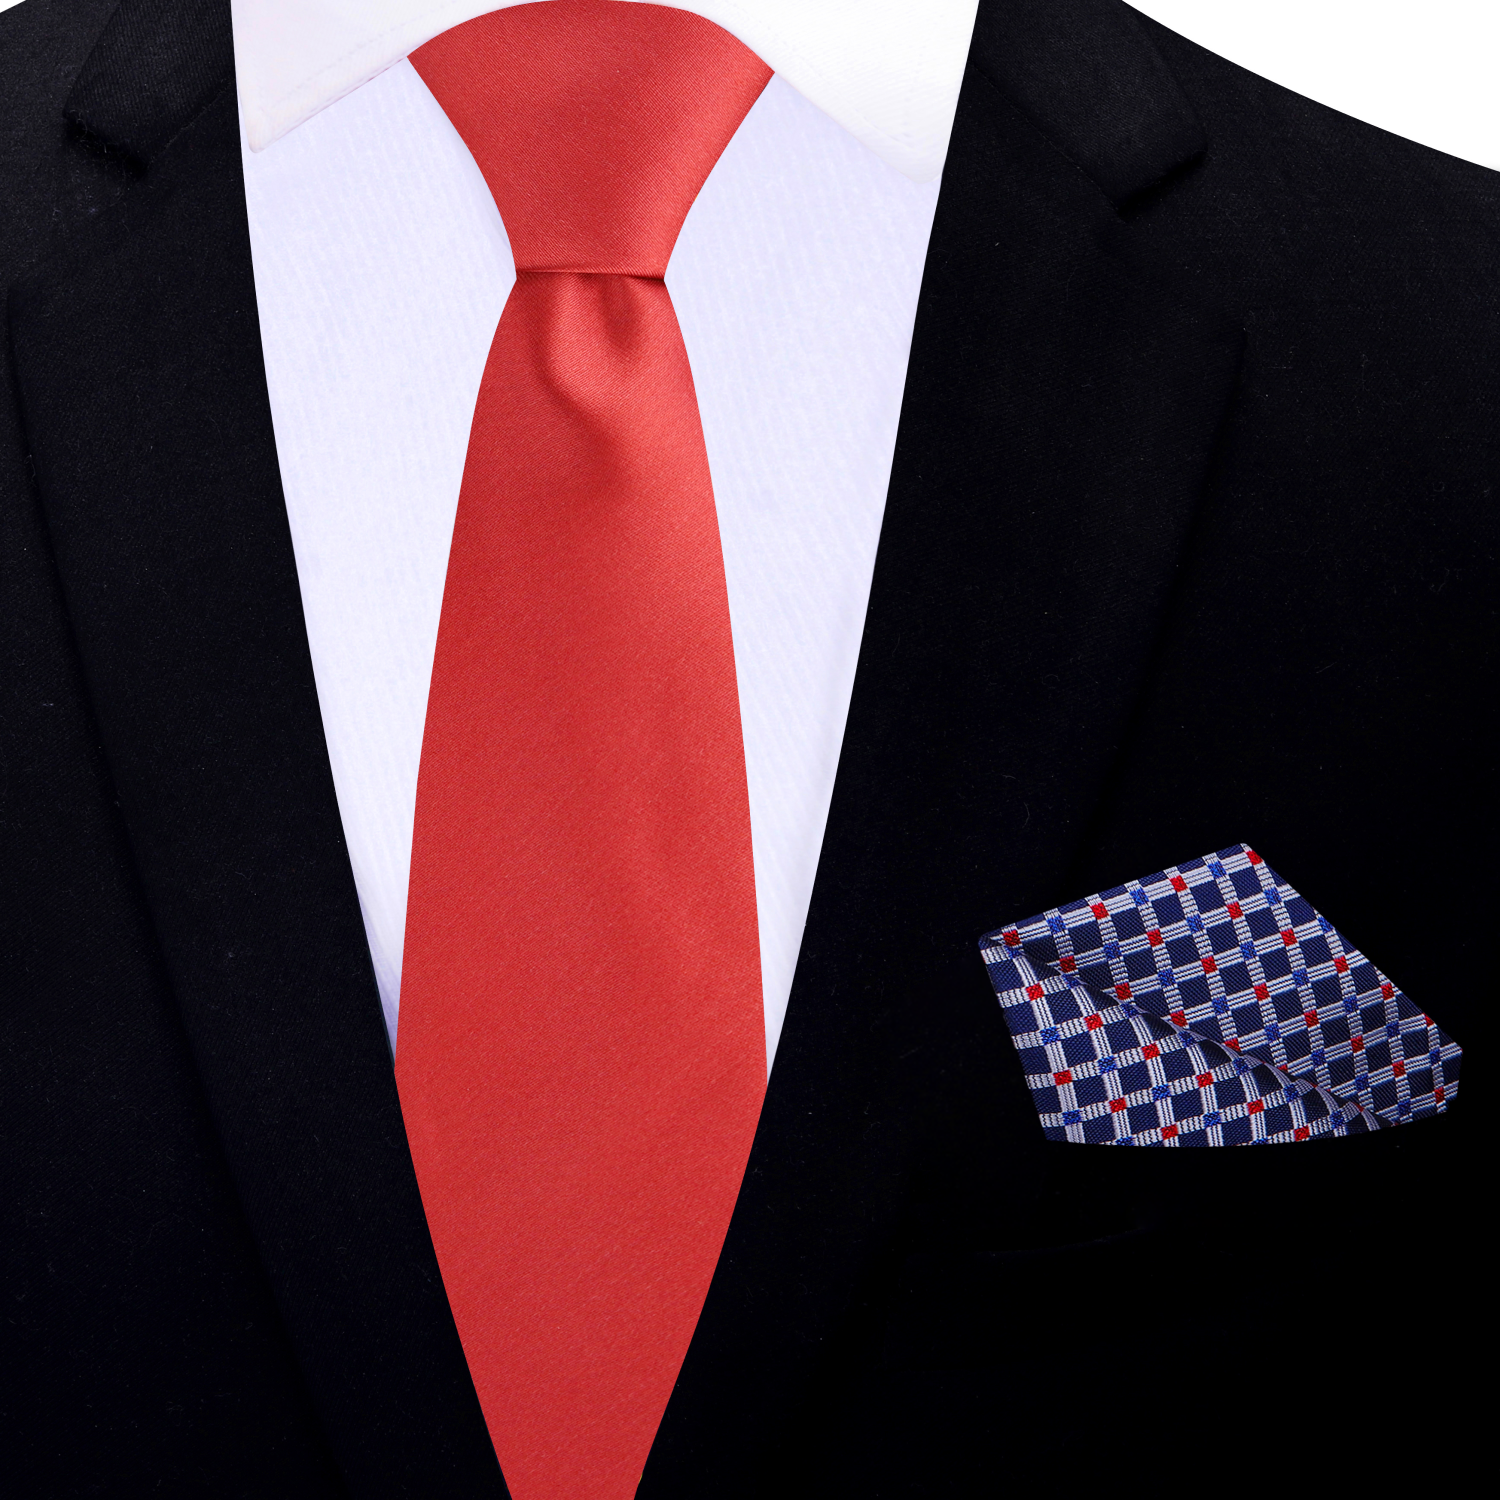 Thin Tie Solid Red Square Necktie and Accenting Dark Blue, Grey and Red Small Check Square